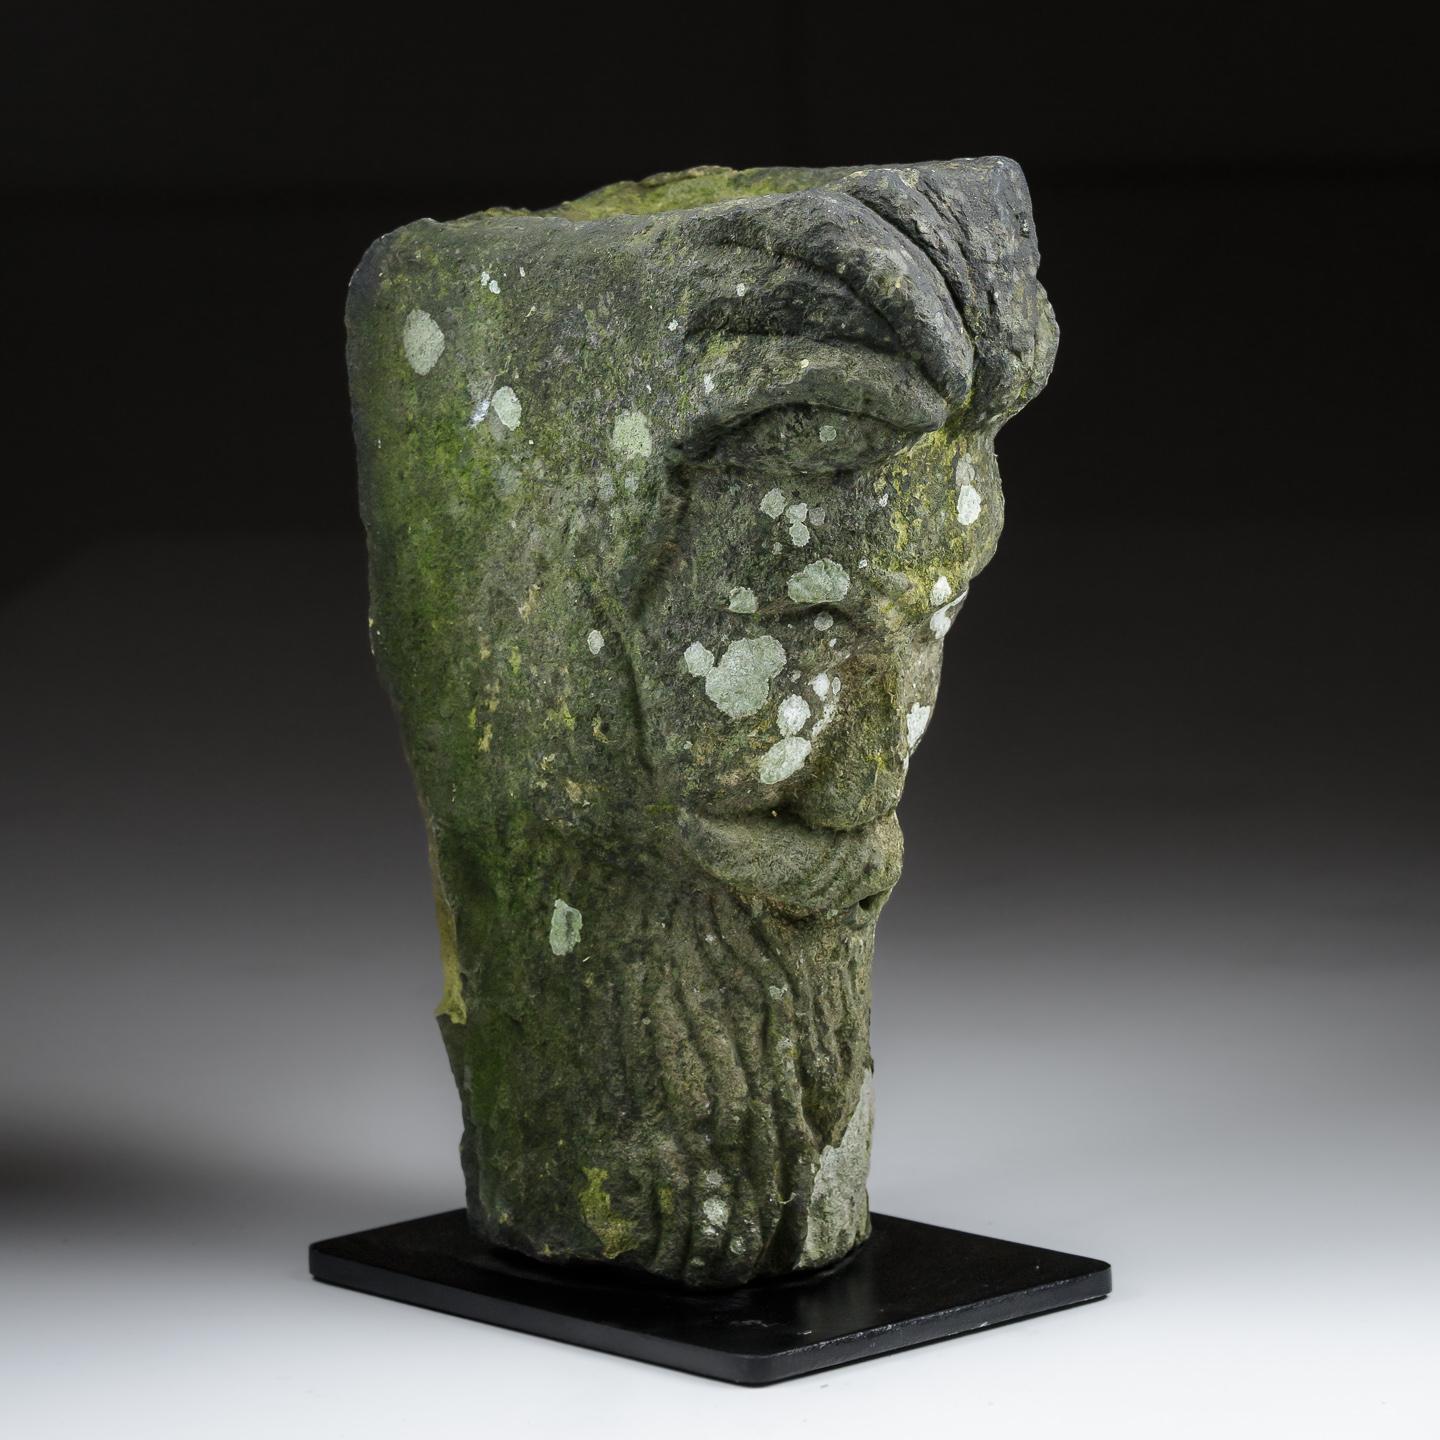 Highly unusual carved stone head of a bearded face with strong defined features. unusual 